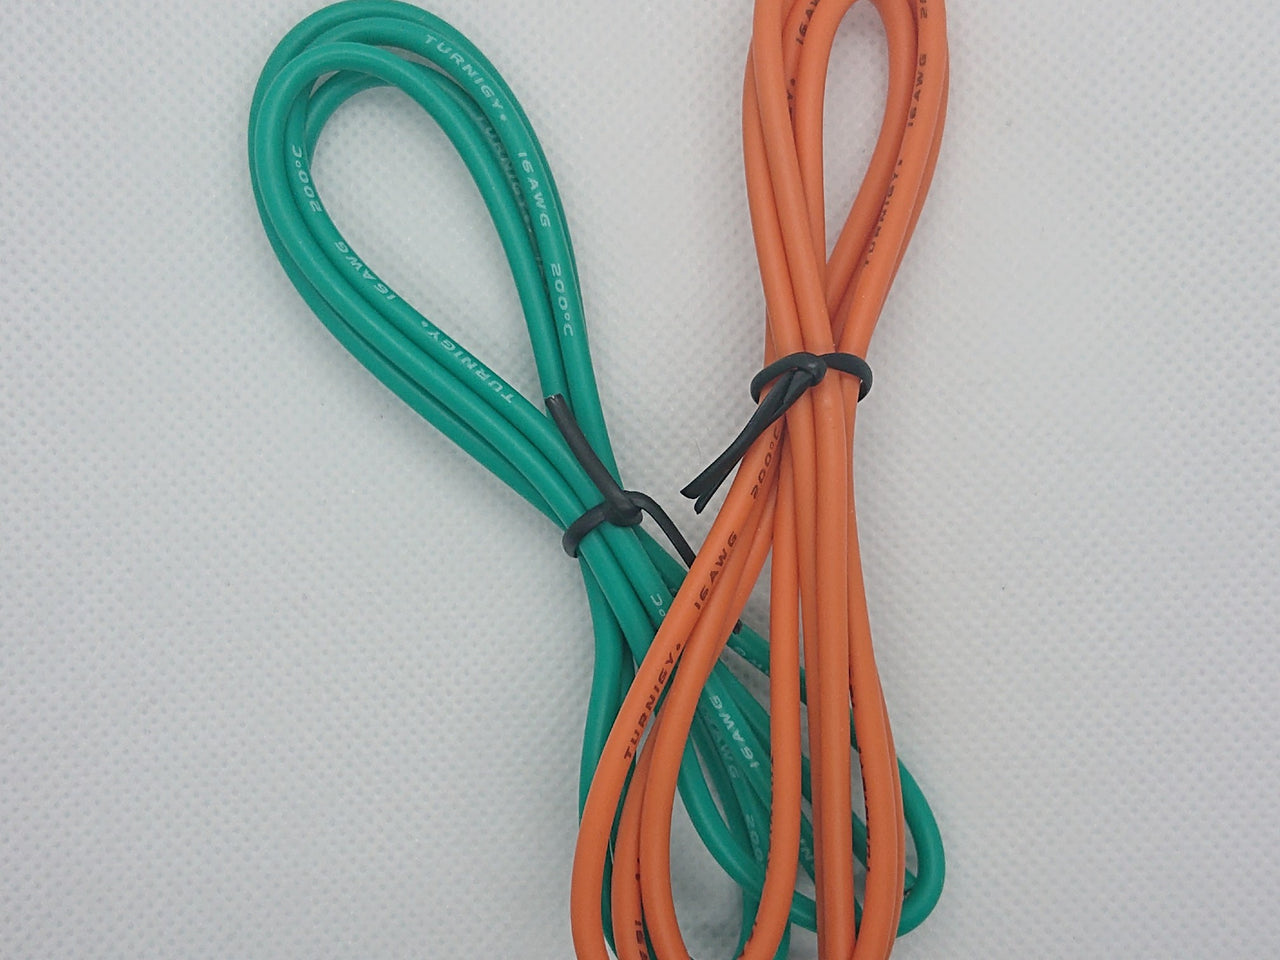 16AWG Silicone Wire - 1 Meter